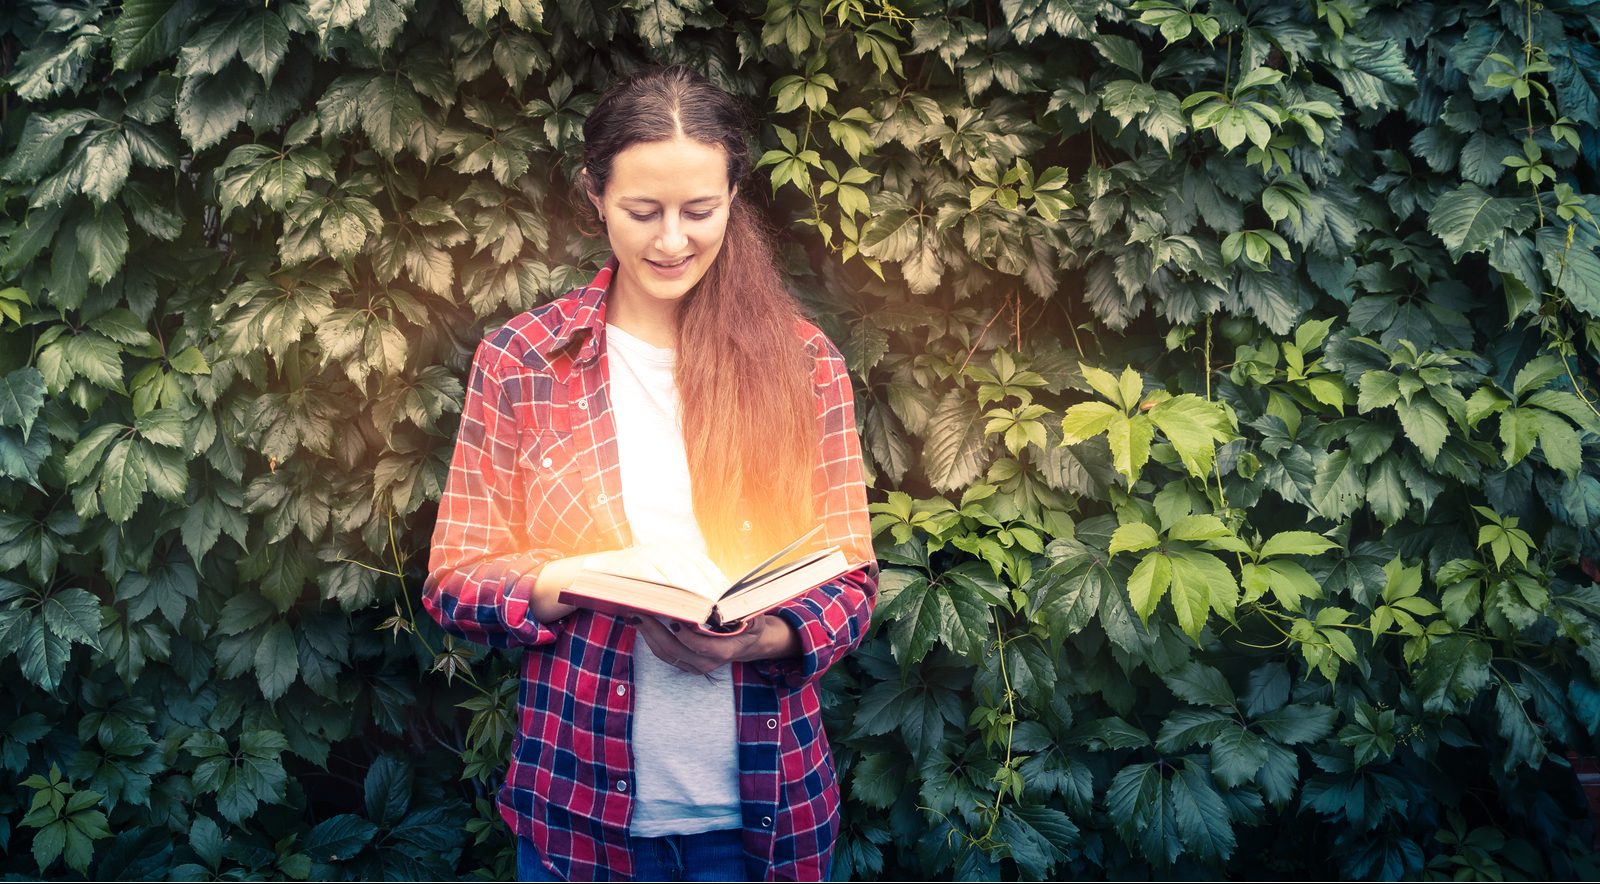 web2-young-dark-haired-woman-in-plaid-red-shirt-and-jeans-holds-in-her-hands-and-reads-a-magic-book-glowing-with-yellow-lights-against-the-beautiful-green-living-wall-of-the-grapes-shutt